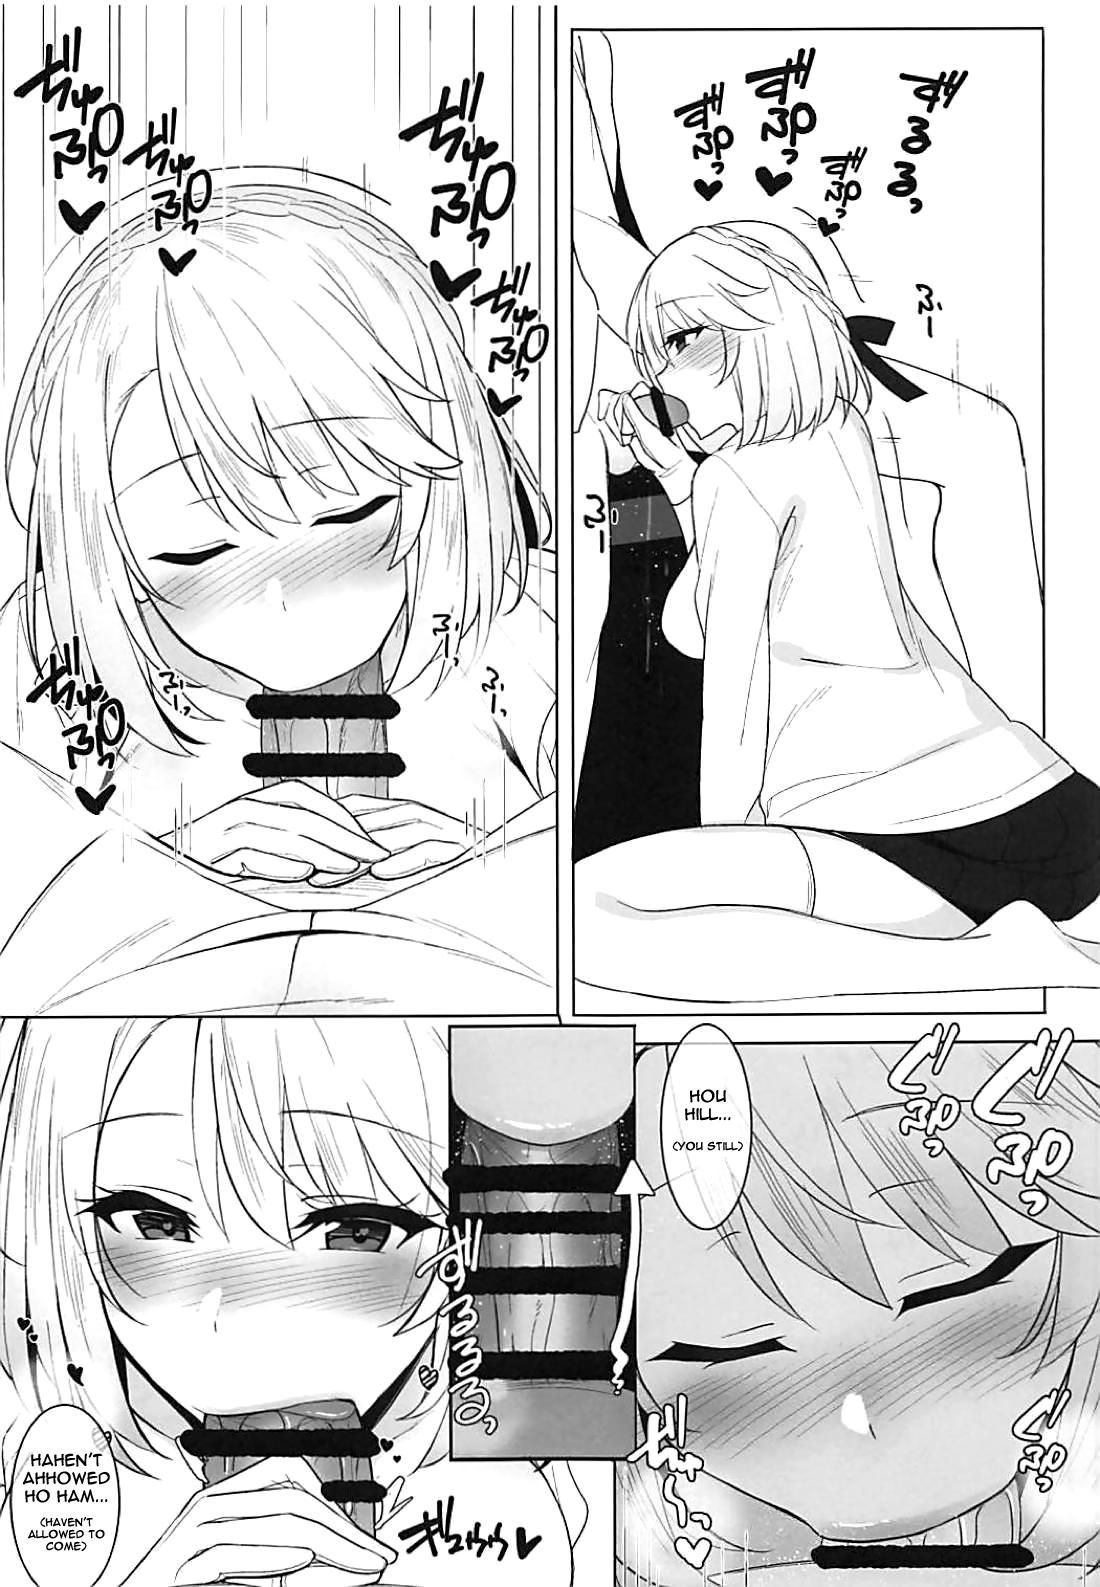 Anal Licking Wales to! | With Wales! - Azur lane Oiled - Page 9